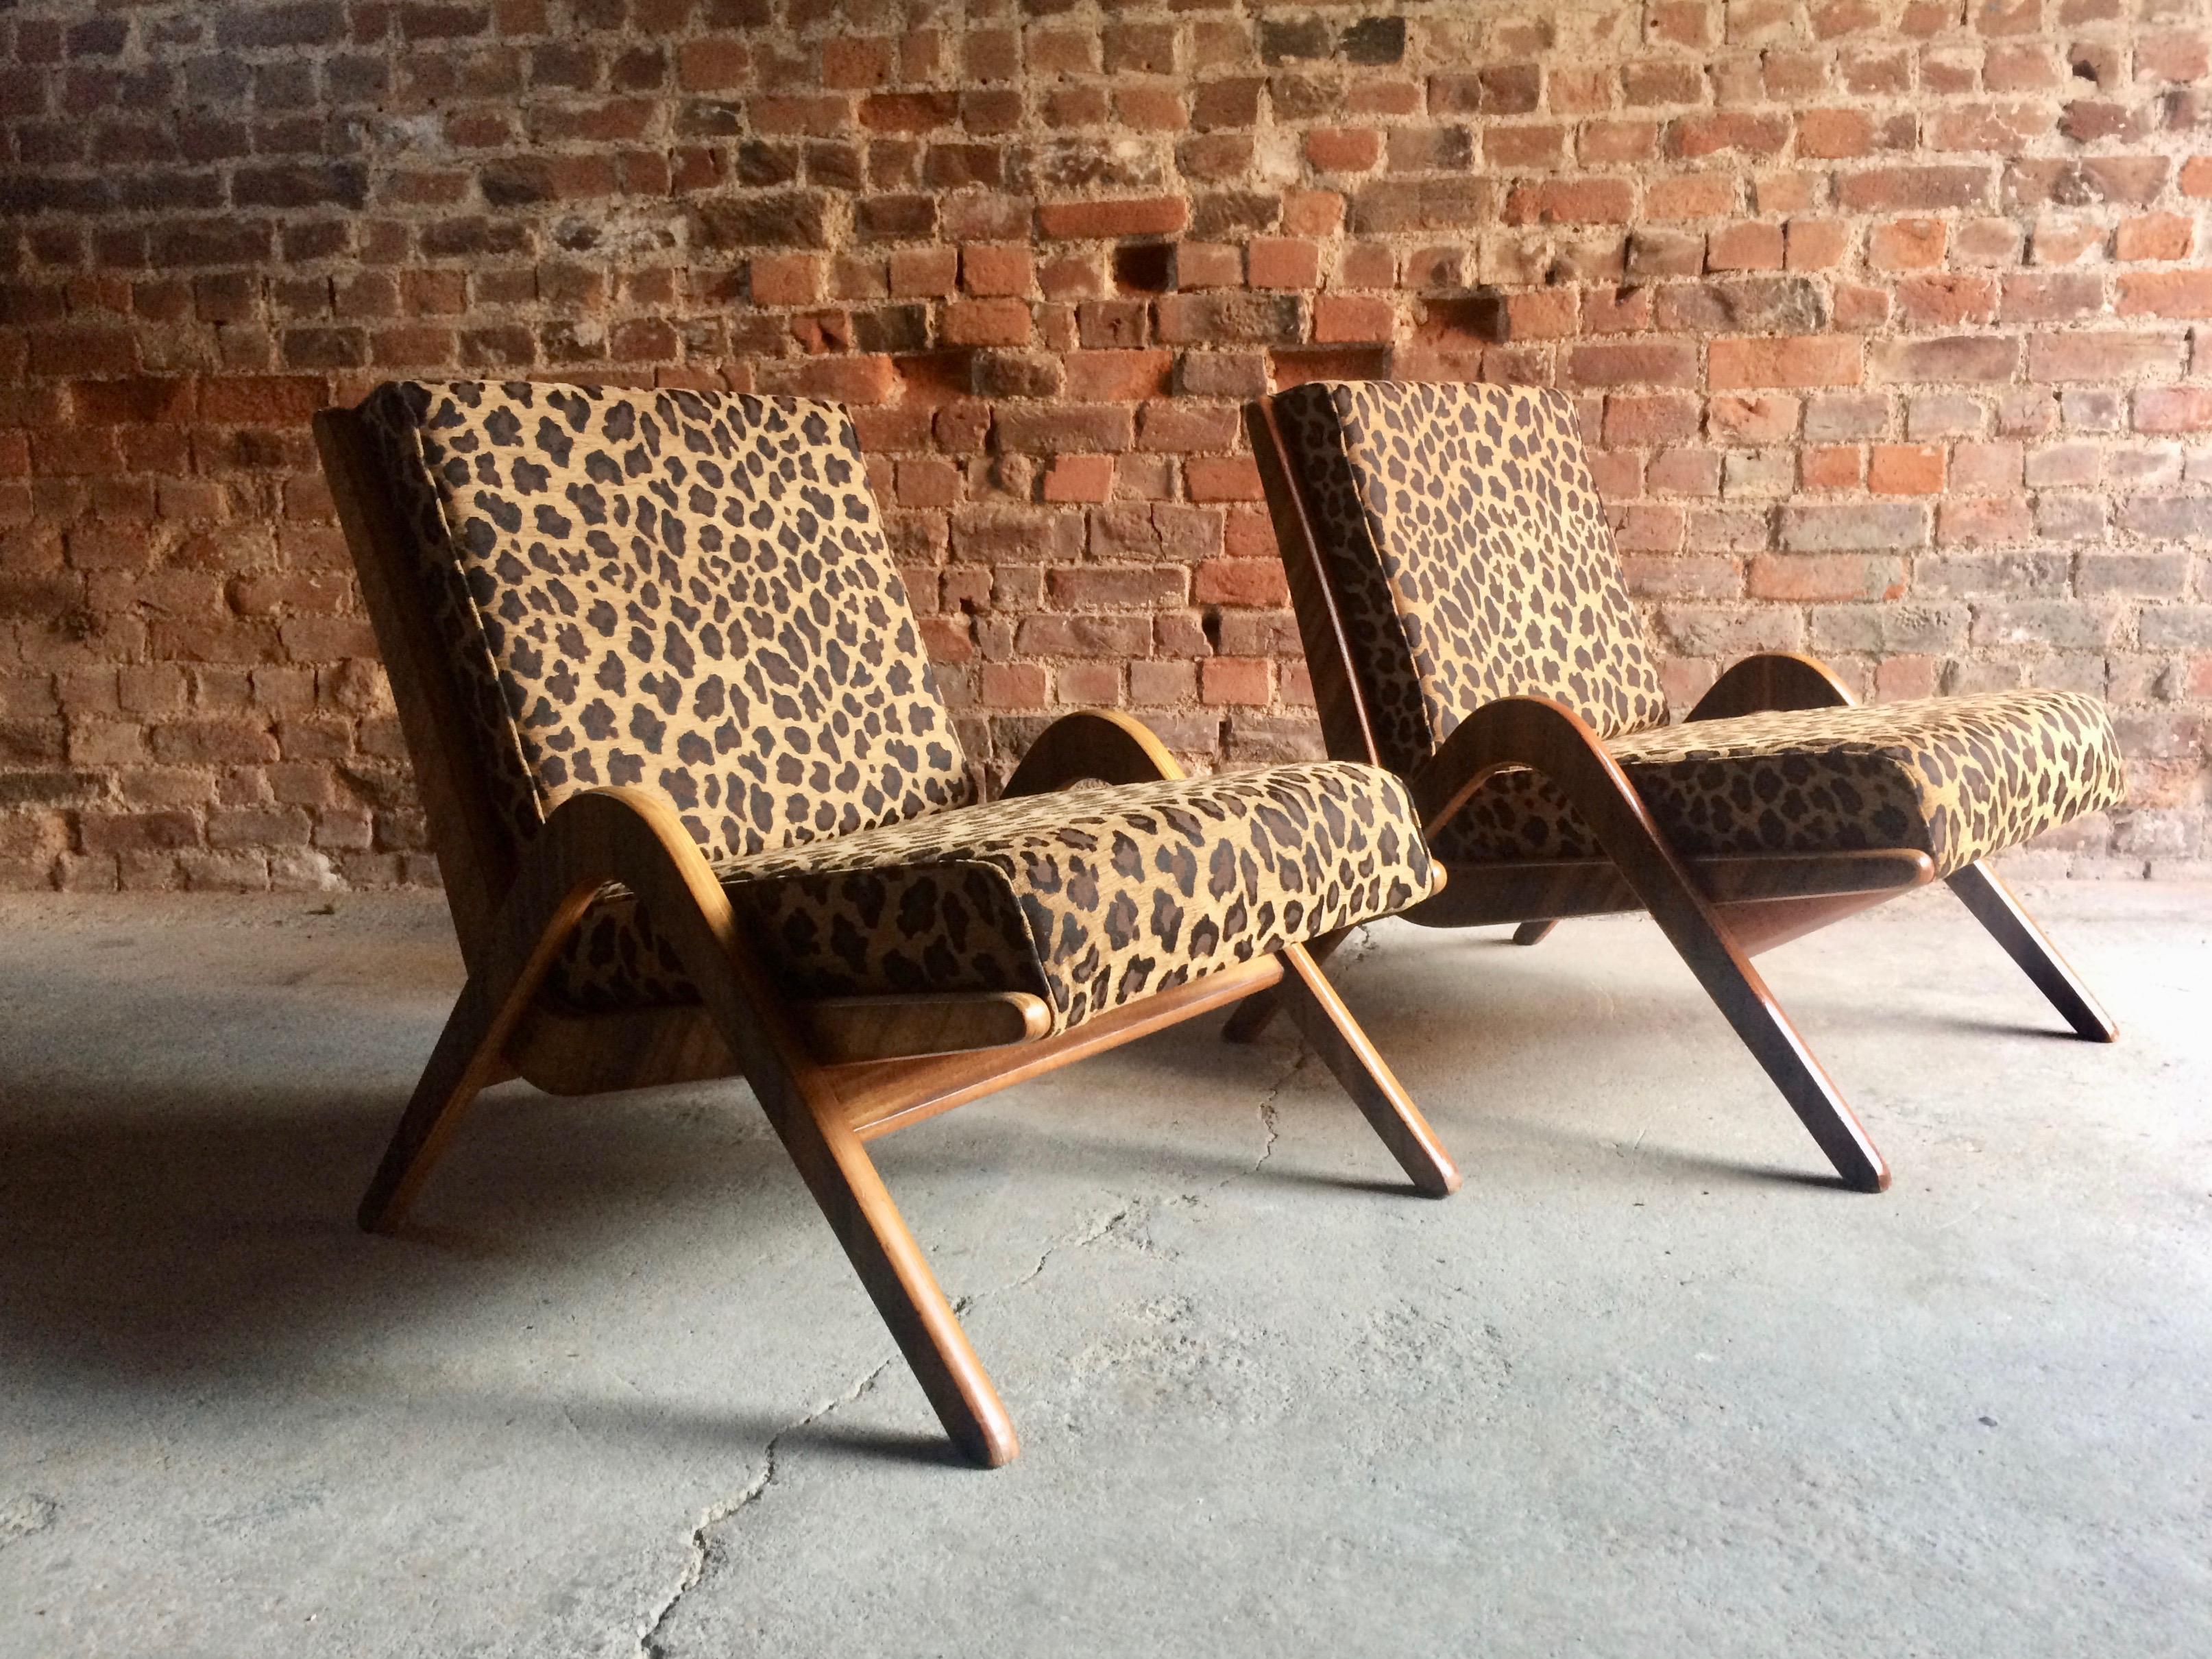 Stunning midcentury Neil Morris for Morris of Glasgow pair of Boomerang chairs, circa 1950, the chairs with African walnut veneered ply, having recently restored and reupholstered in a fabulous Leopard print fabric, the chairs are offered in superb